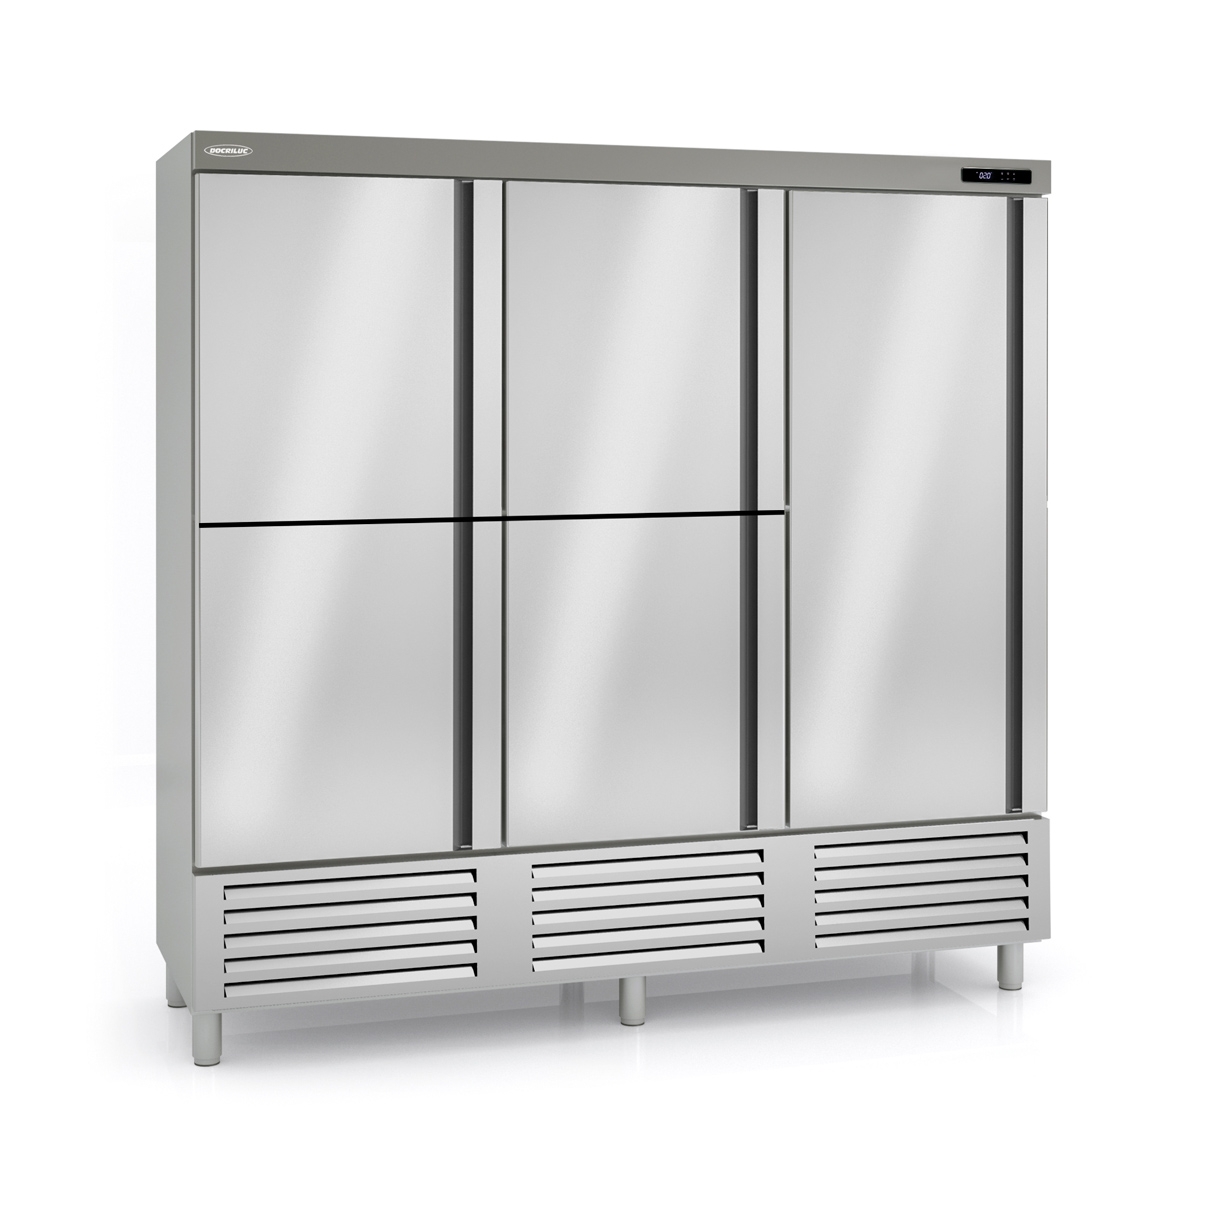 Snack Refrigerated Cabinet ARS-210-5